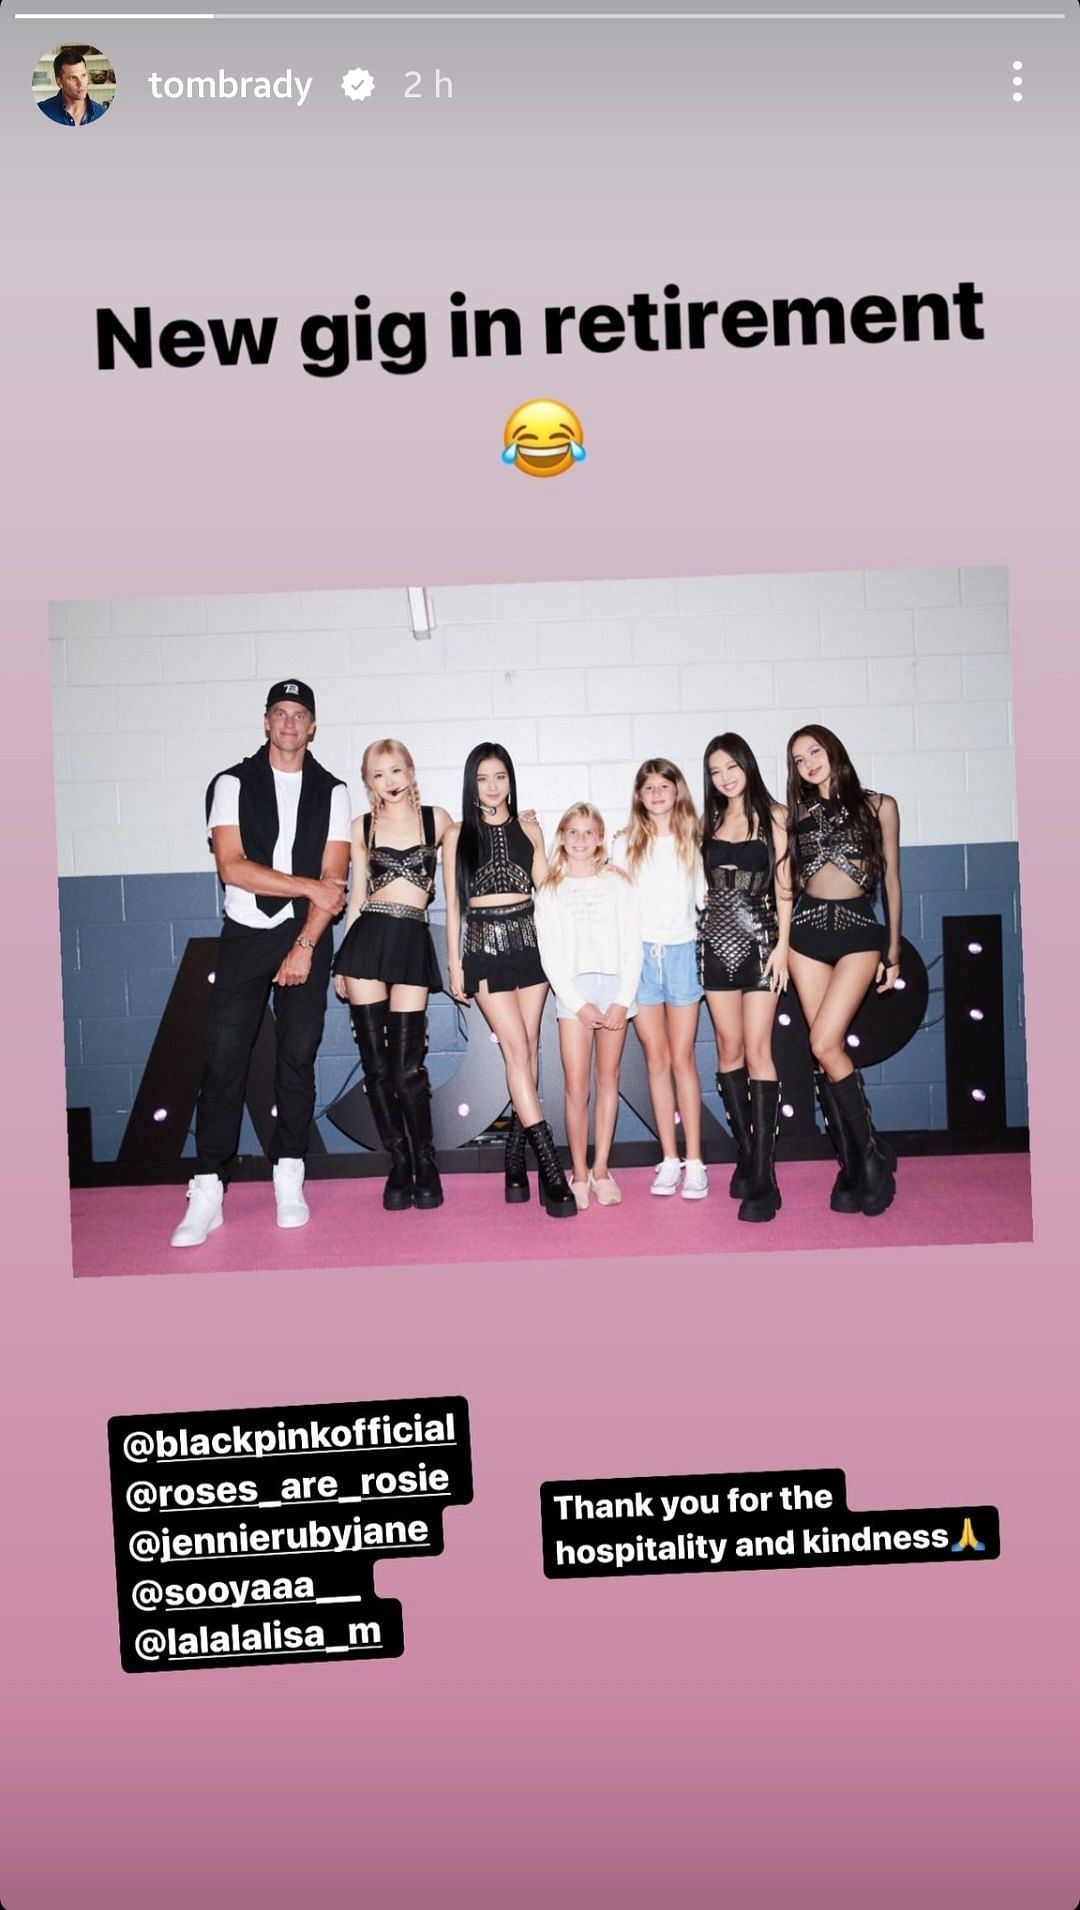 Tom Brady posts a photo with his daughter, Vivian, and the girl group Blackpink. (Image credit: Tom Brady on Instagram)